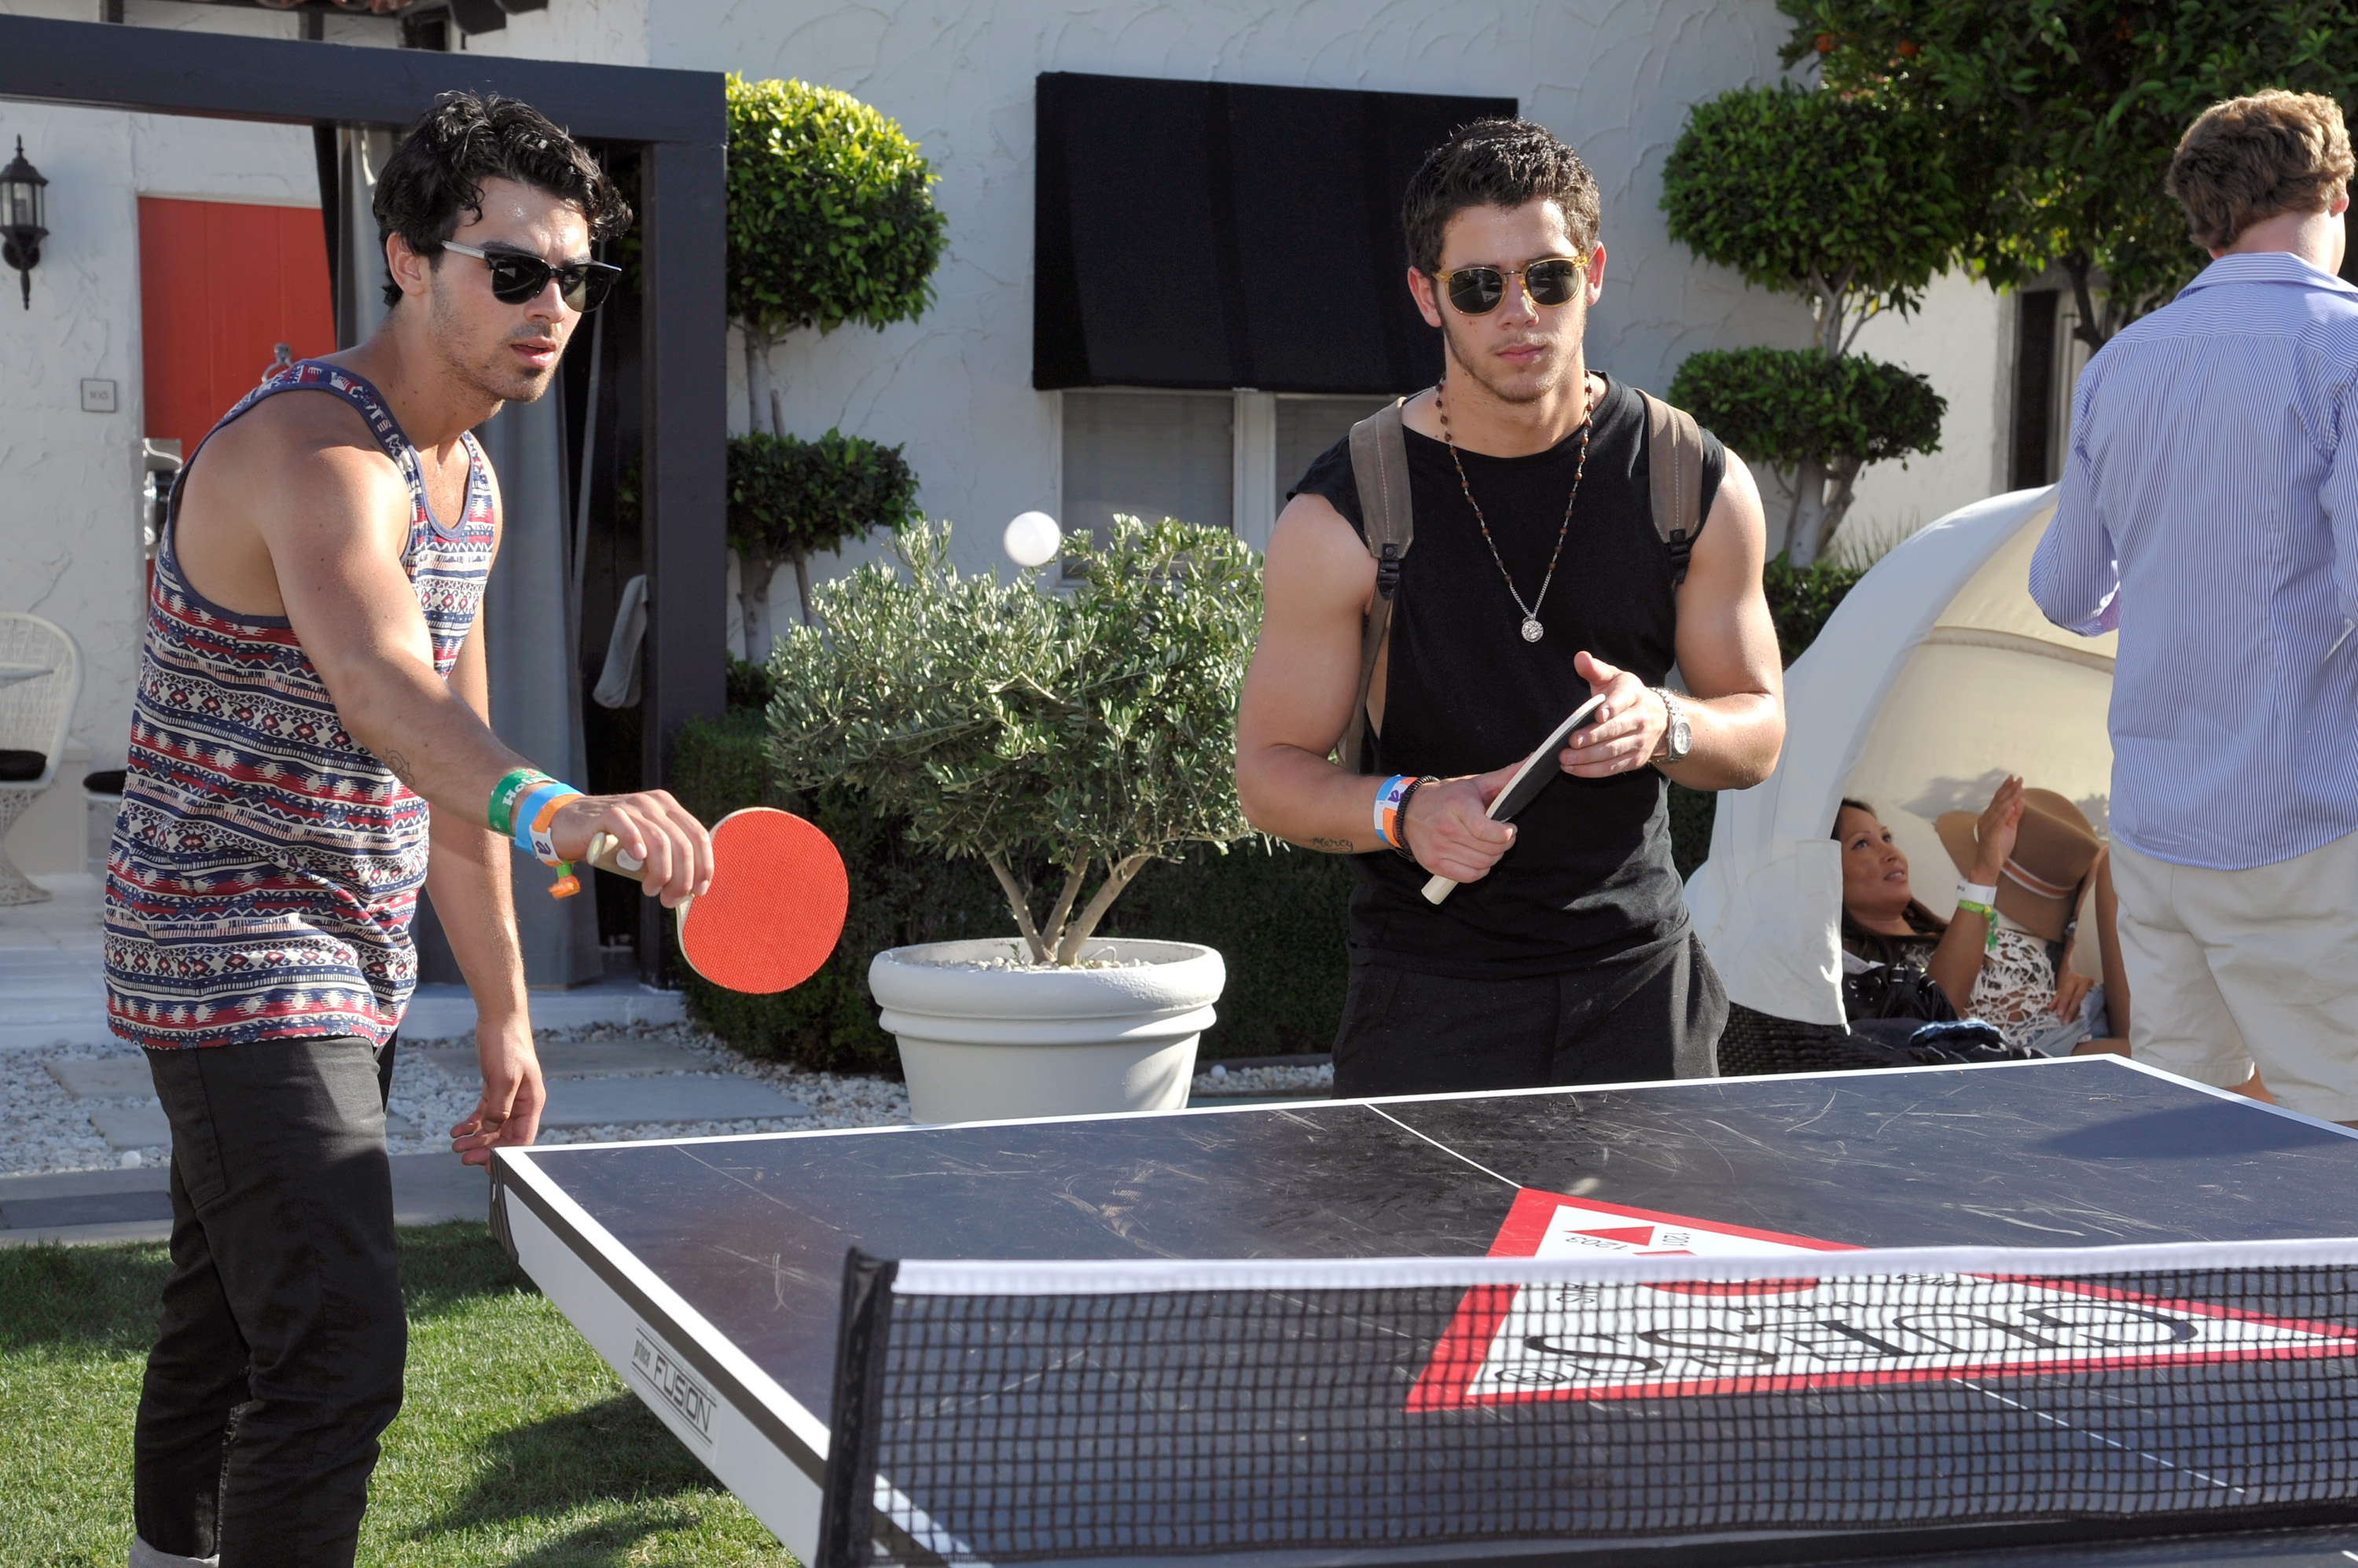 PALM SPRINGS, CA - APRIL 14: Joe Jonas and Nick Jonas attend the GUESS Hotel pool party at the Viceroy Palm Springs on April 14, 2013 in Palm Springs, California. (Photo by John Sciulli/Getty Images for GUESS)